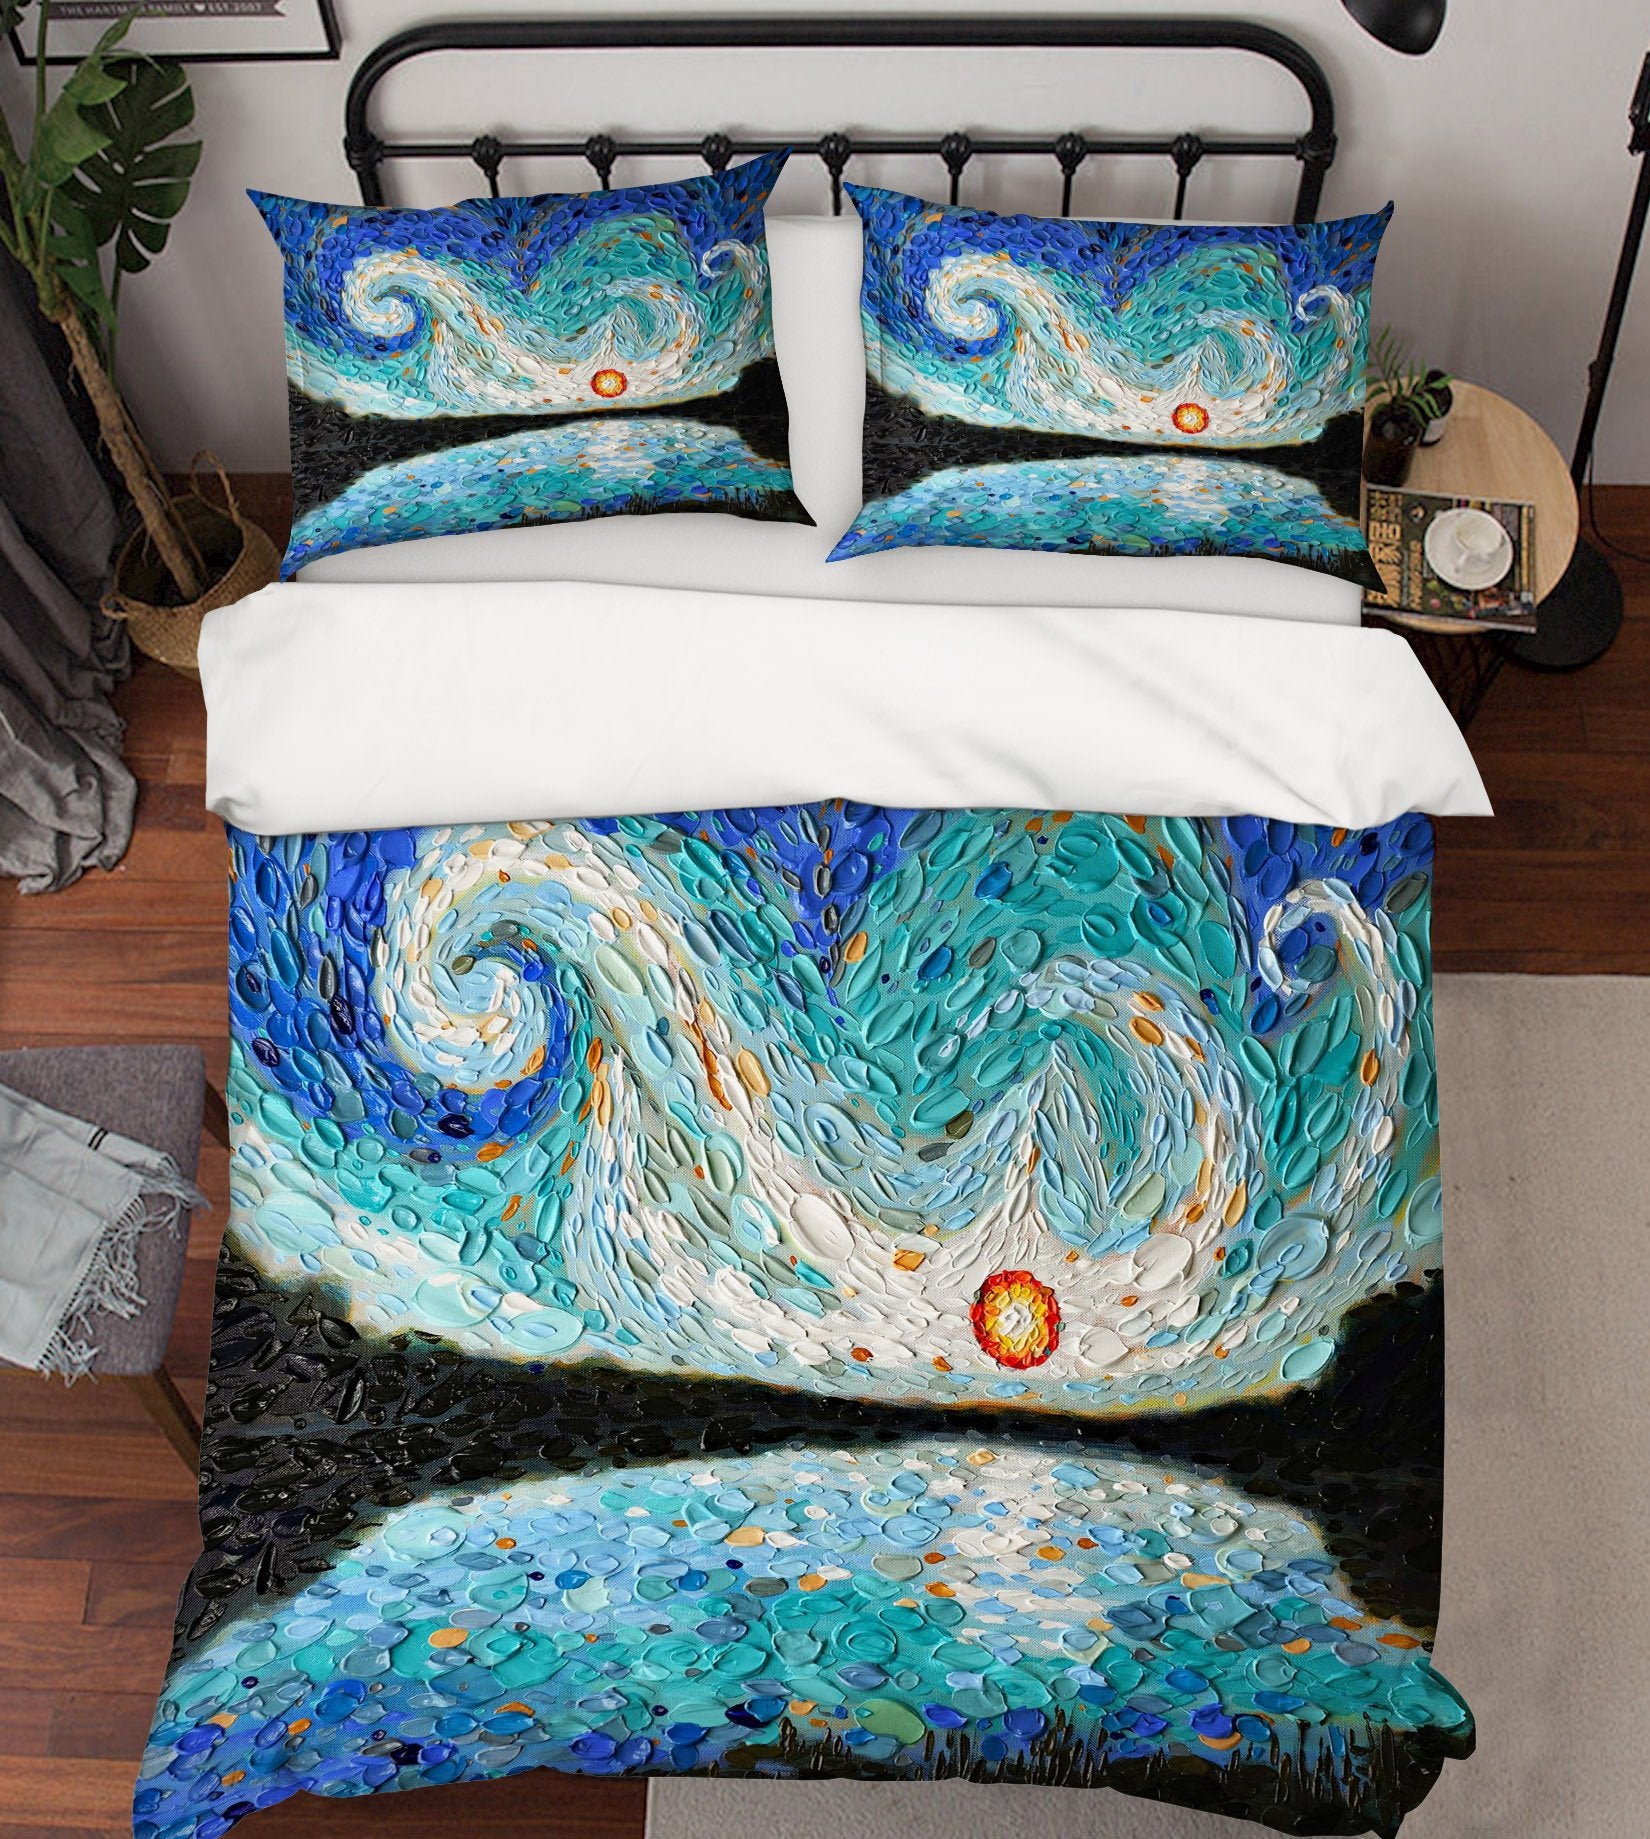 3D Abstract Art Painting 2018 Dena Tollefson bedding Bed Pillowcases Quilt Quiet Covers AJ Creativity Home 